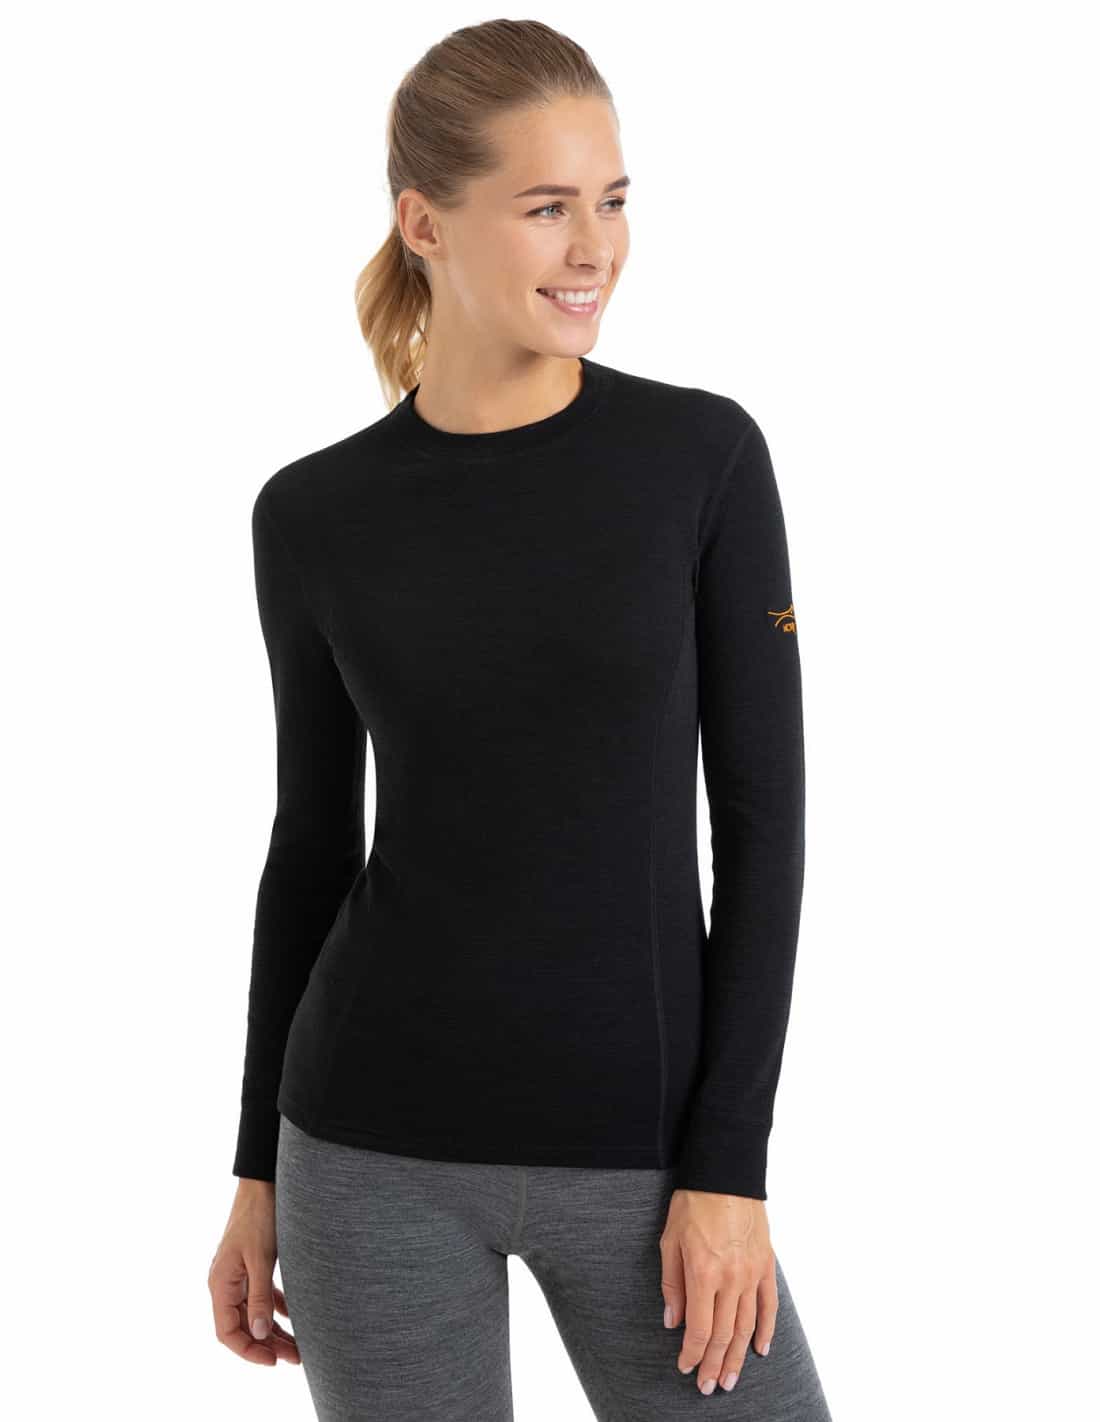 Maillot thermique Femme, Protection -30°C